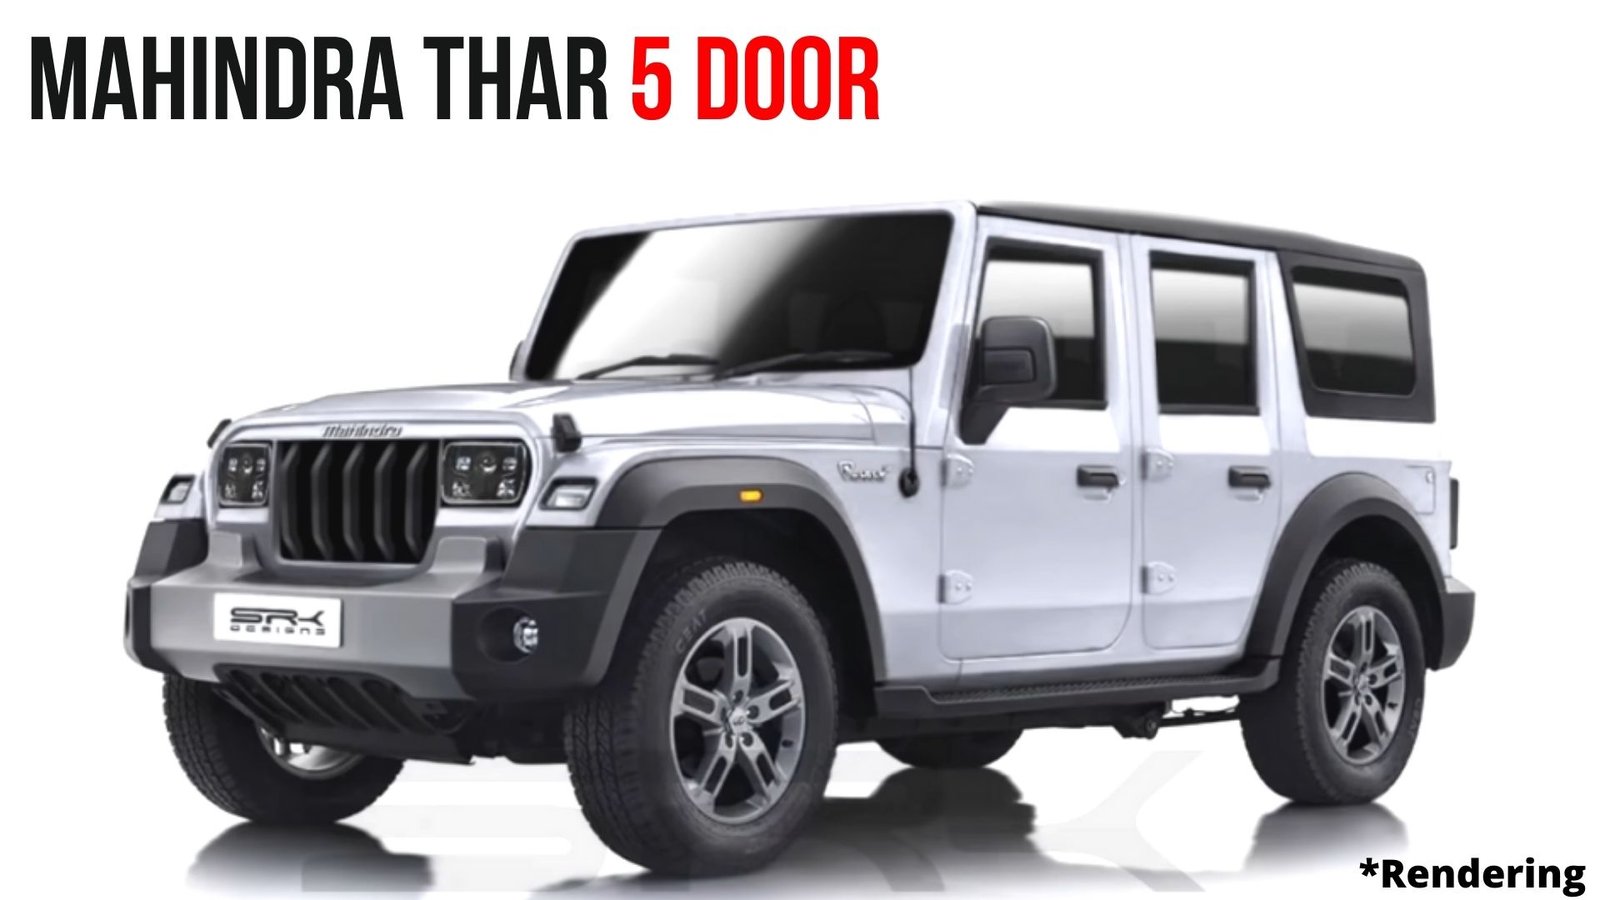 Mahindra Thar 5 door ready to take Launch in the Indian Market